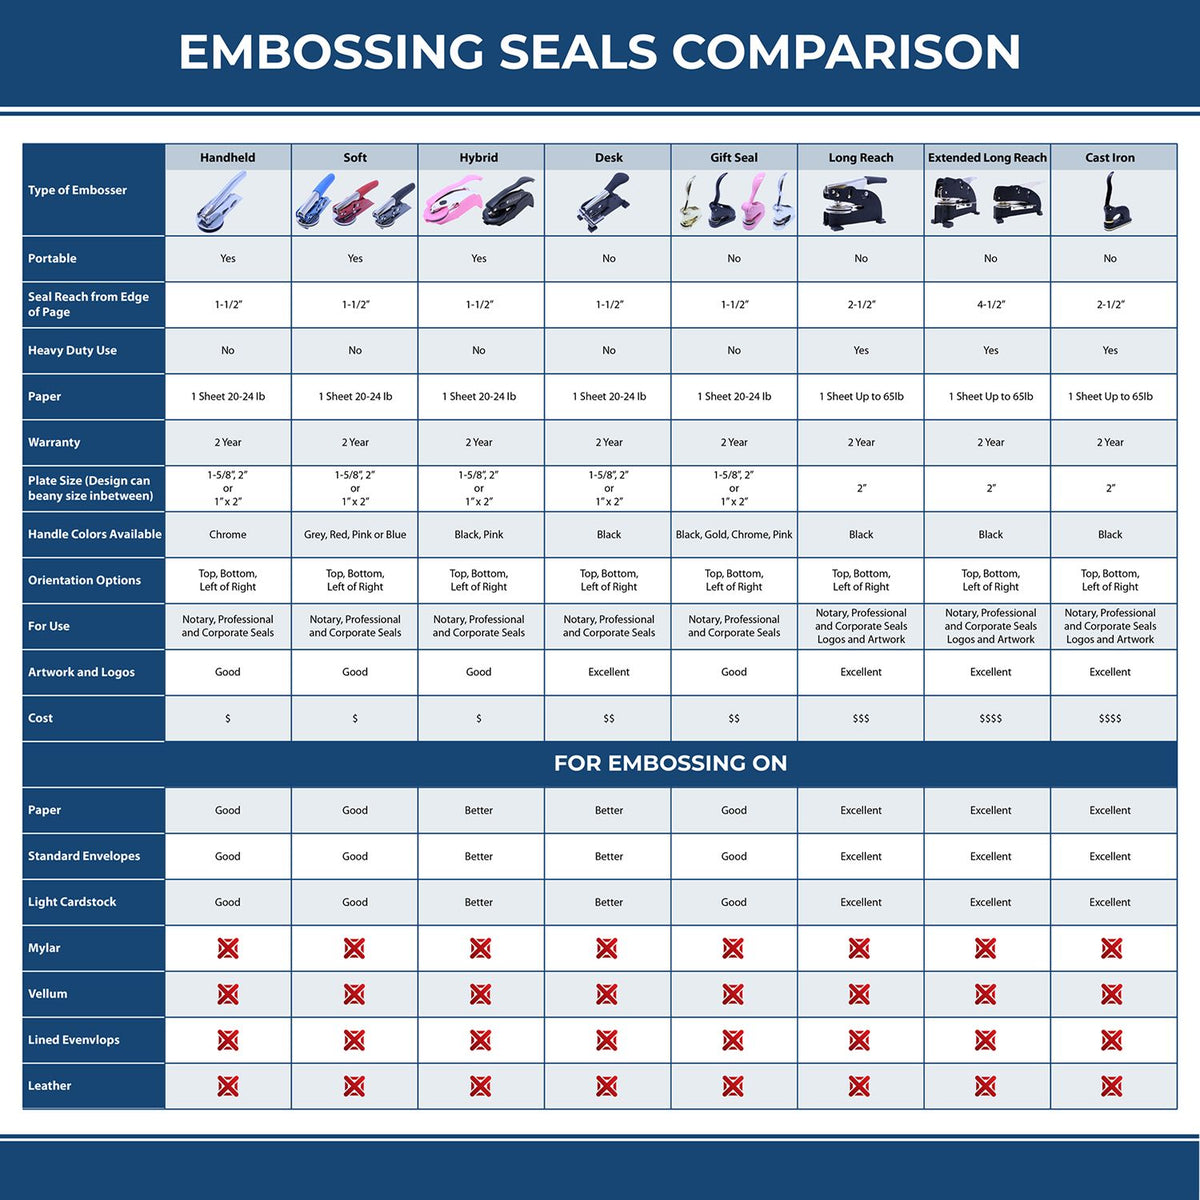 A comparison chart for the different types of mount models available for the Handheld New Hampshire Architect Seal Embosser.